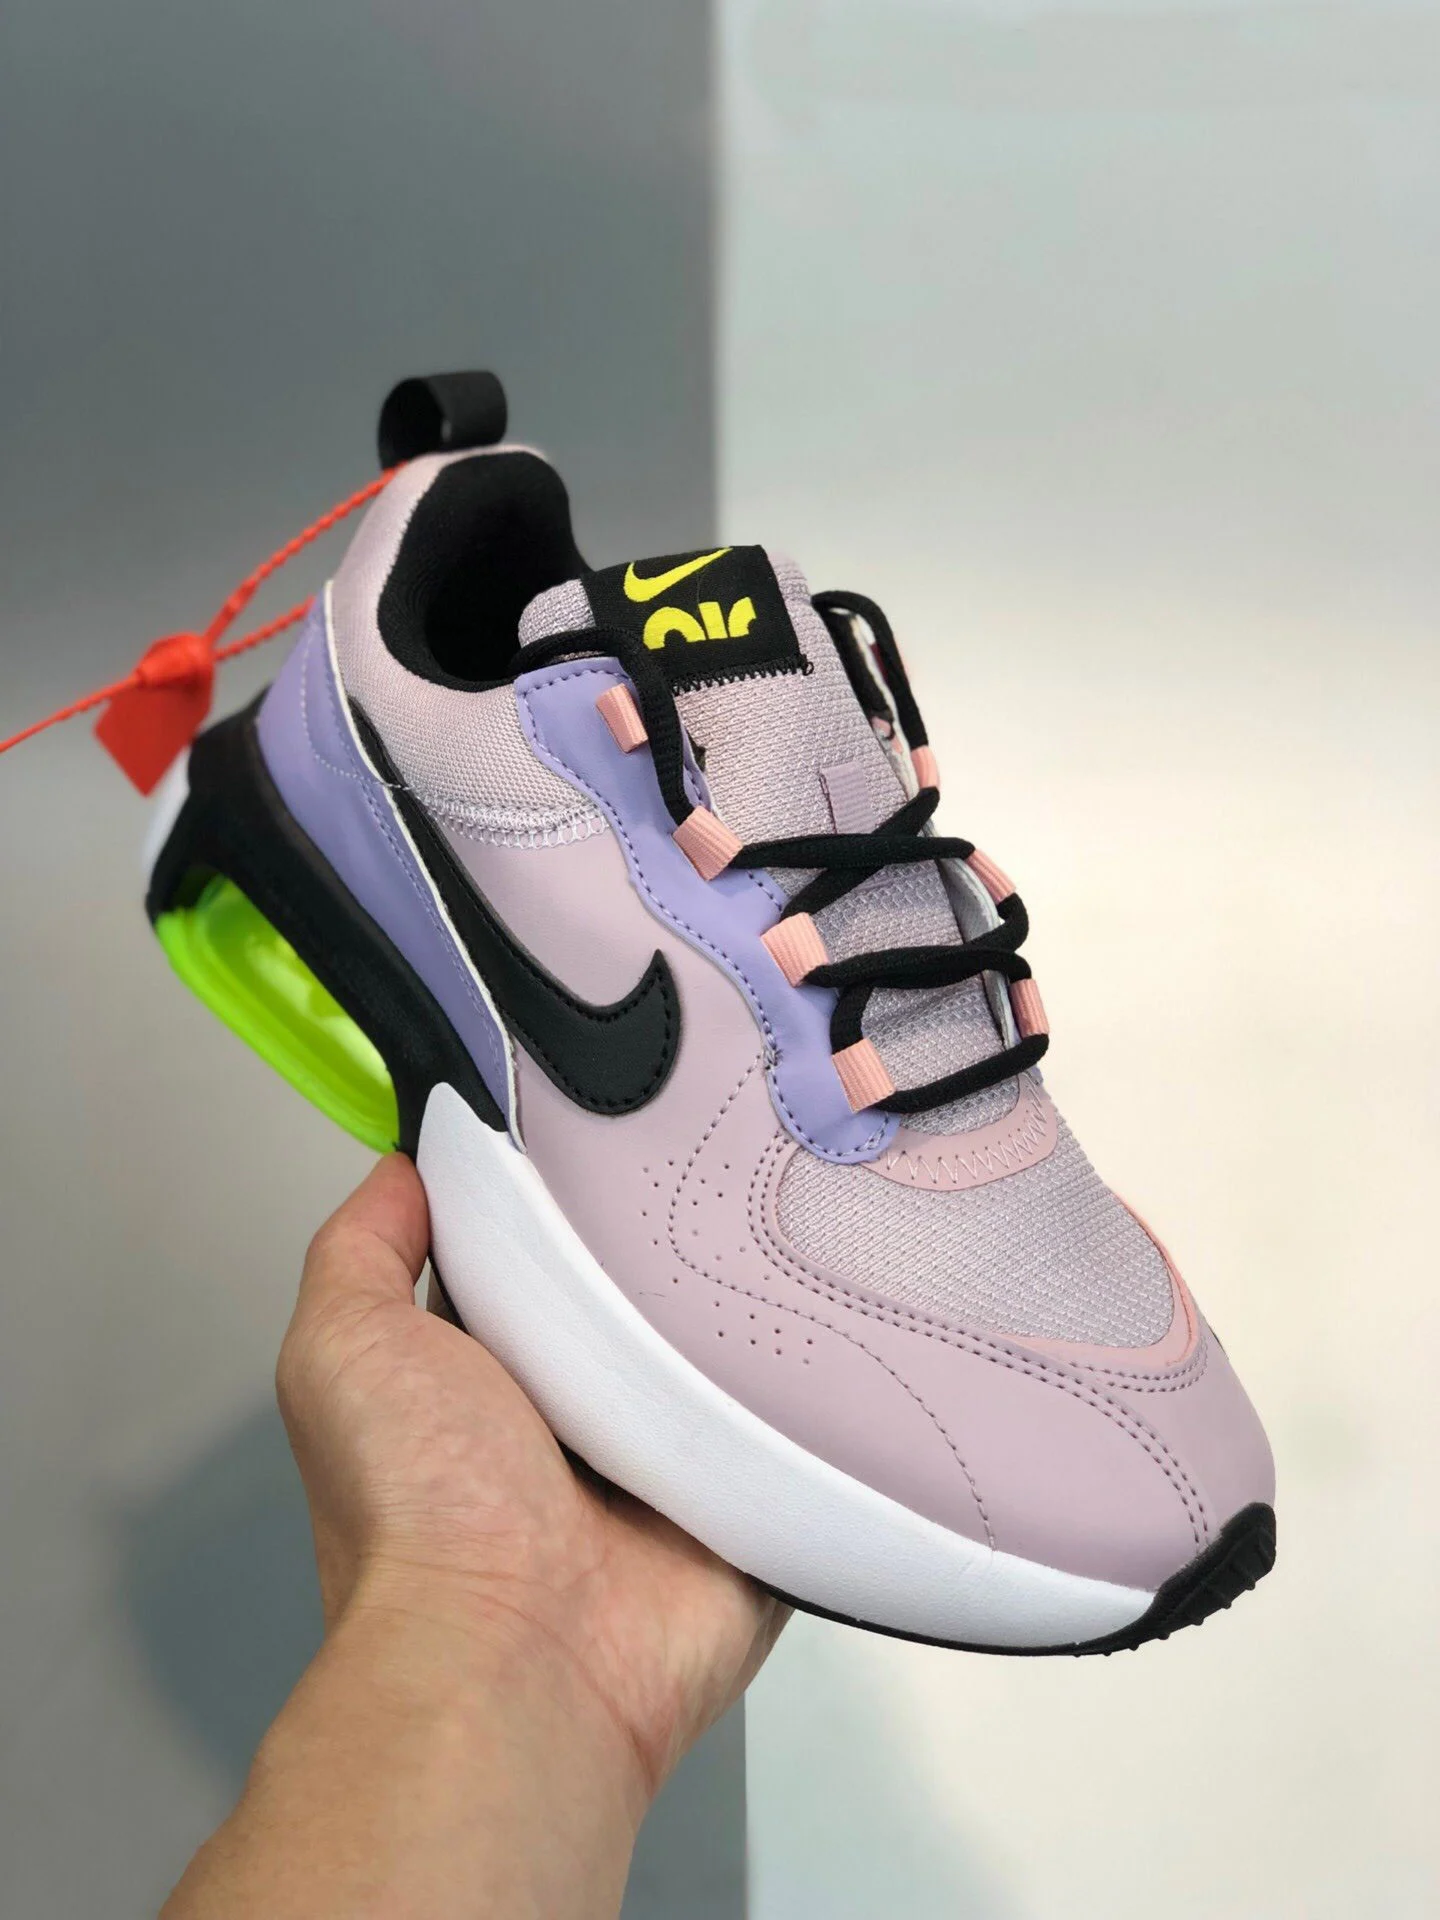 Nike WMNS Air Max Verona Plum Chalk Ghost Oracle Pink Black For Sale